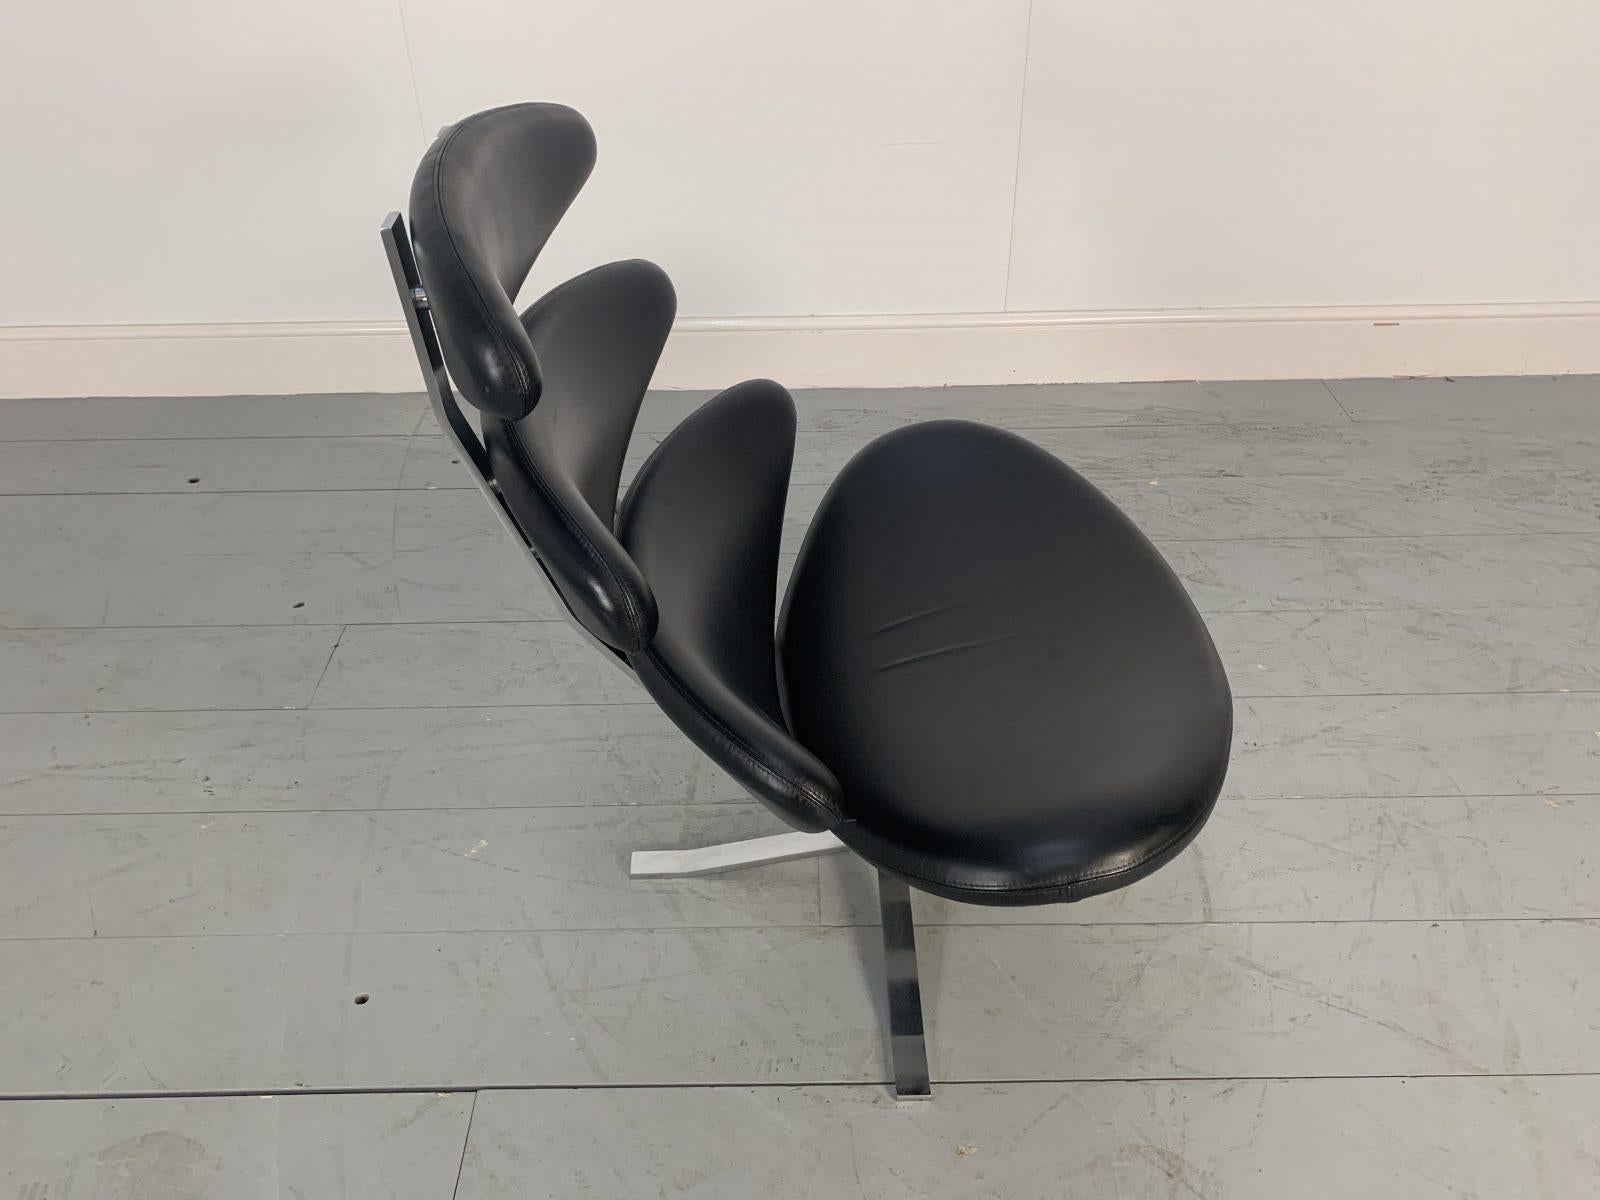 Spectacular Pair of Erik Jorgensen “Corona” EJ5 Chairs in Black “Apache” Leather For Sale 6